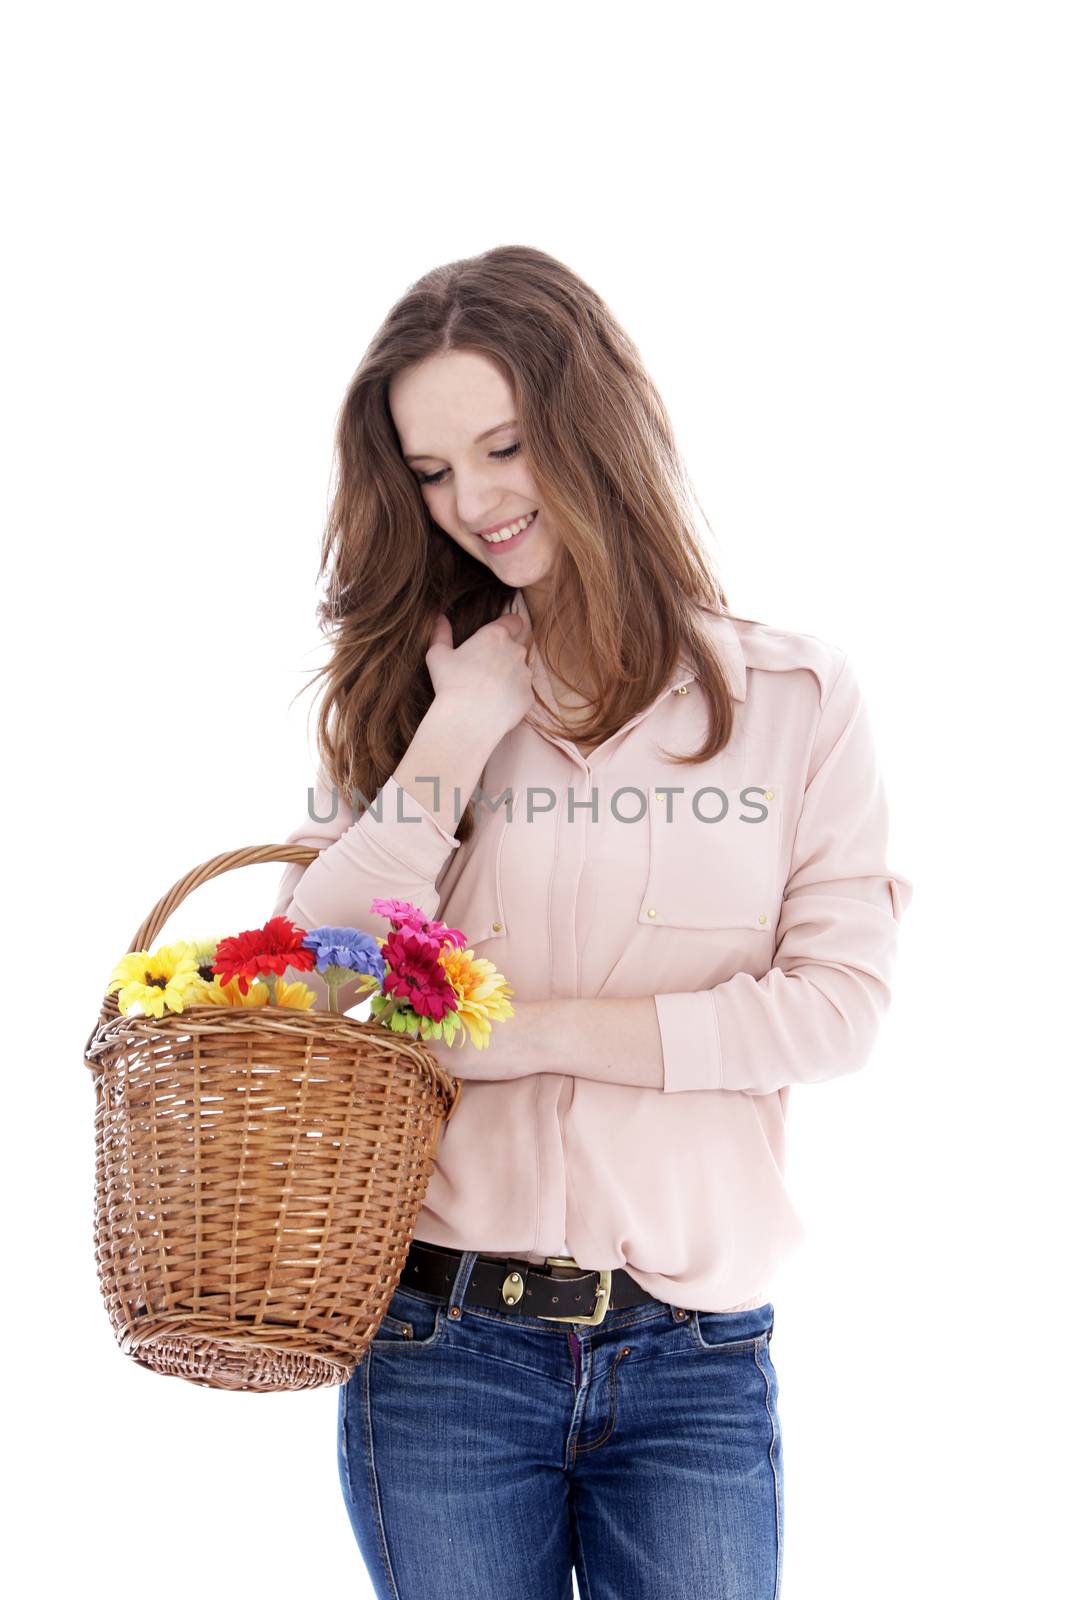 Smiling teenager with a basket of flowers by Farina6000